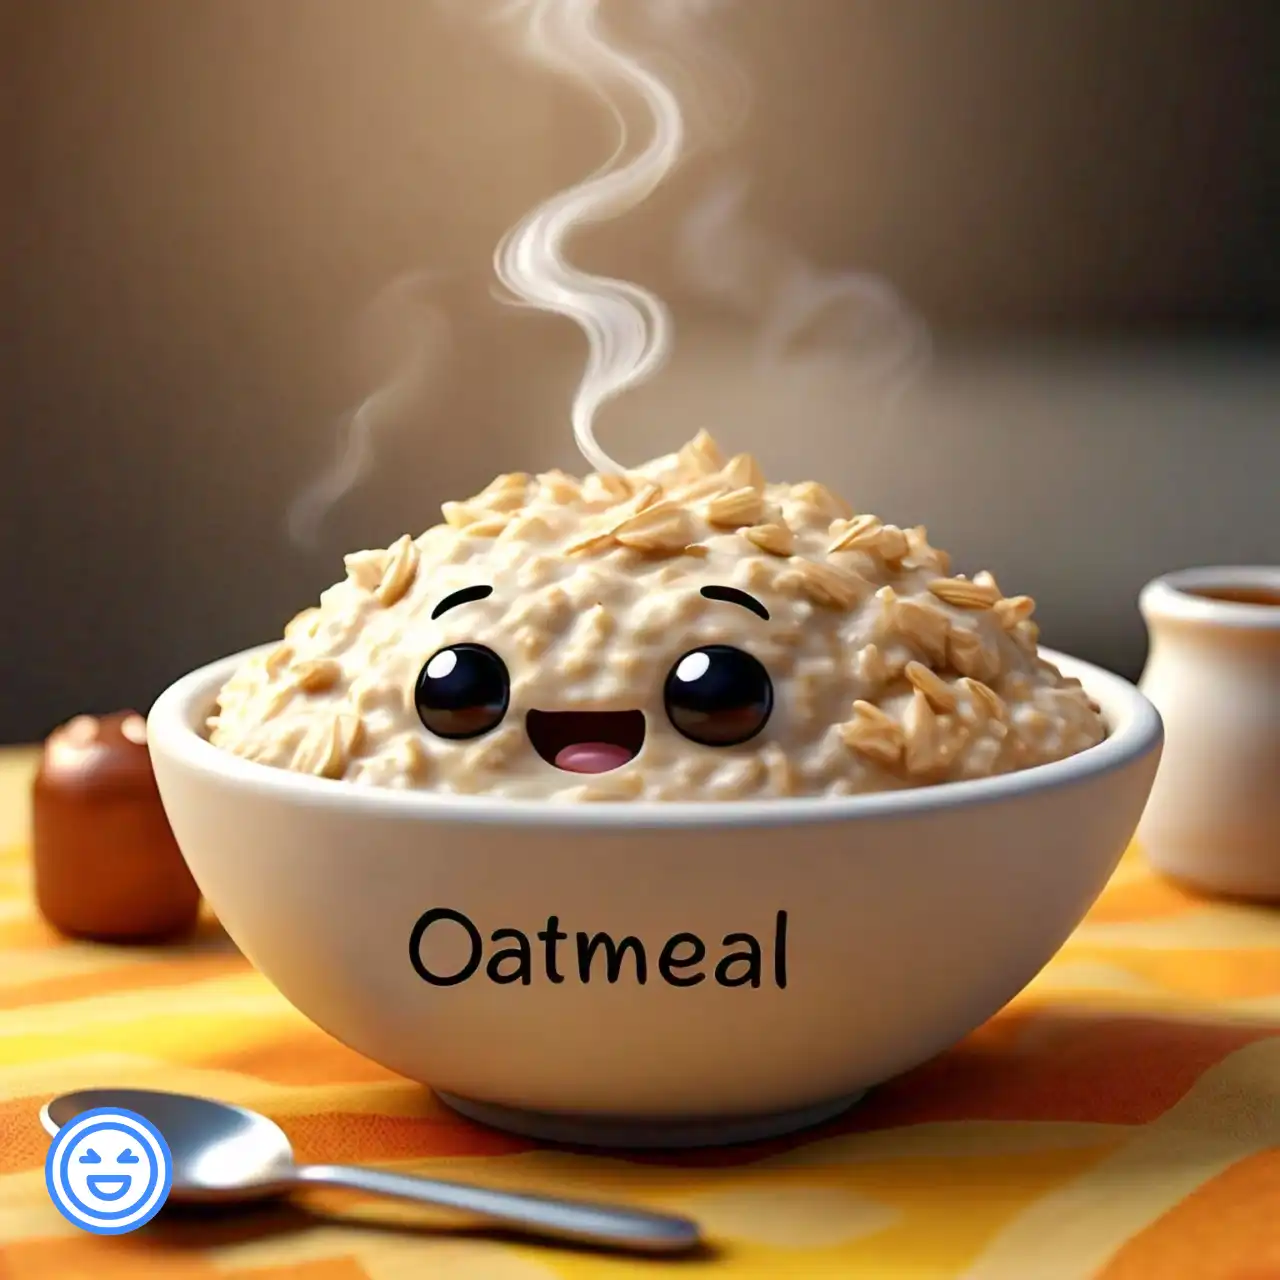 funny Oatmeal jokes and one liner clever Oatmeal puns 3 at PunnyPeak.com